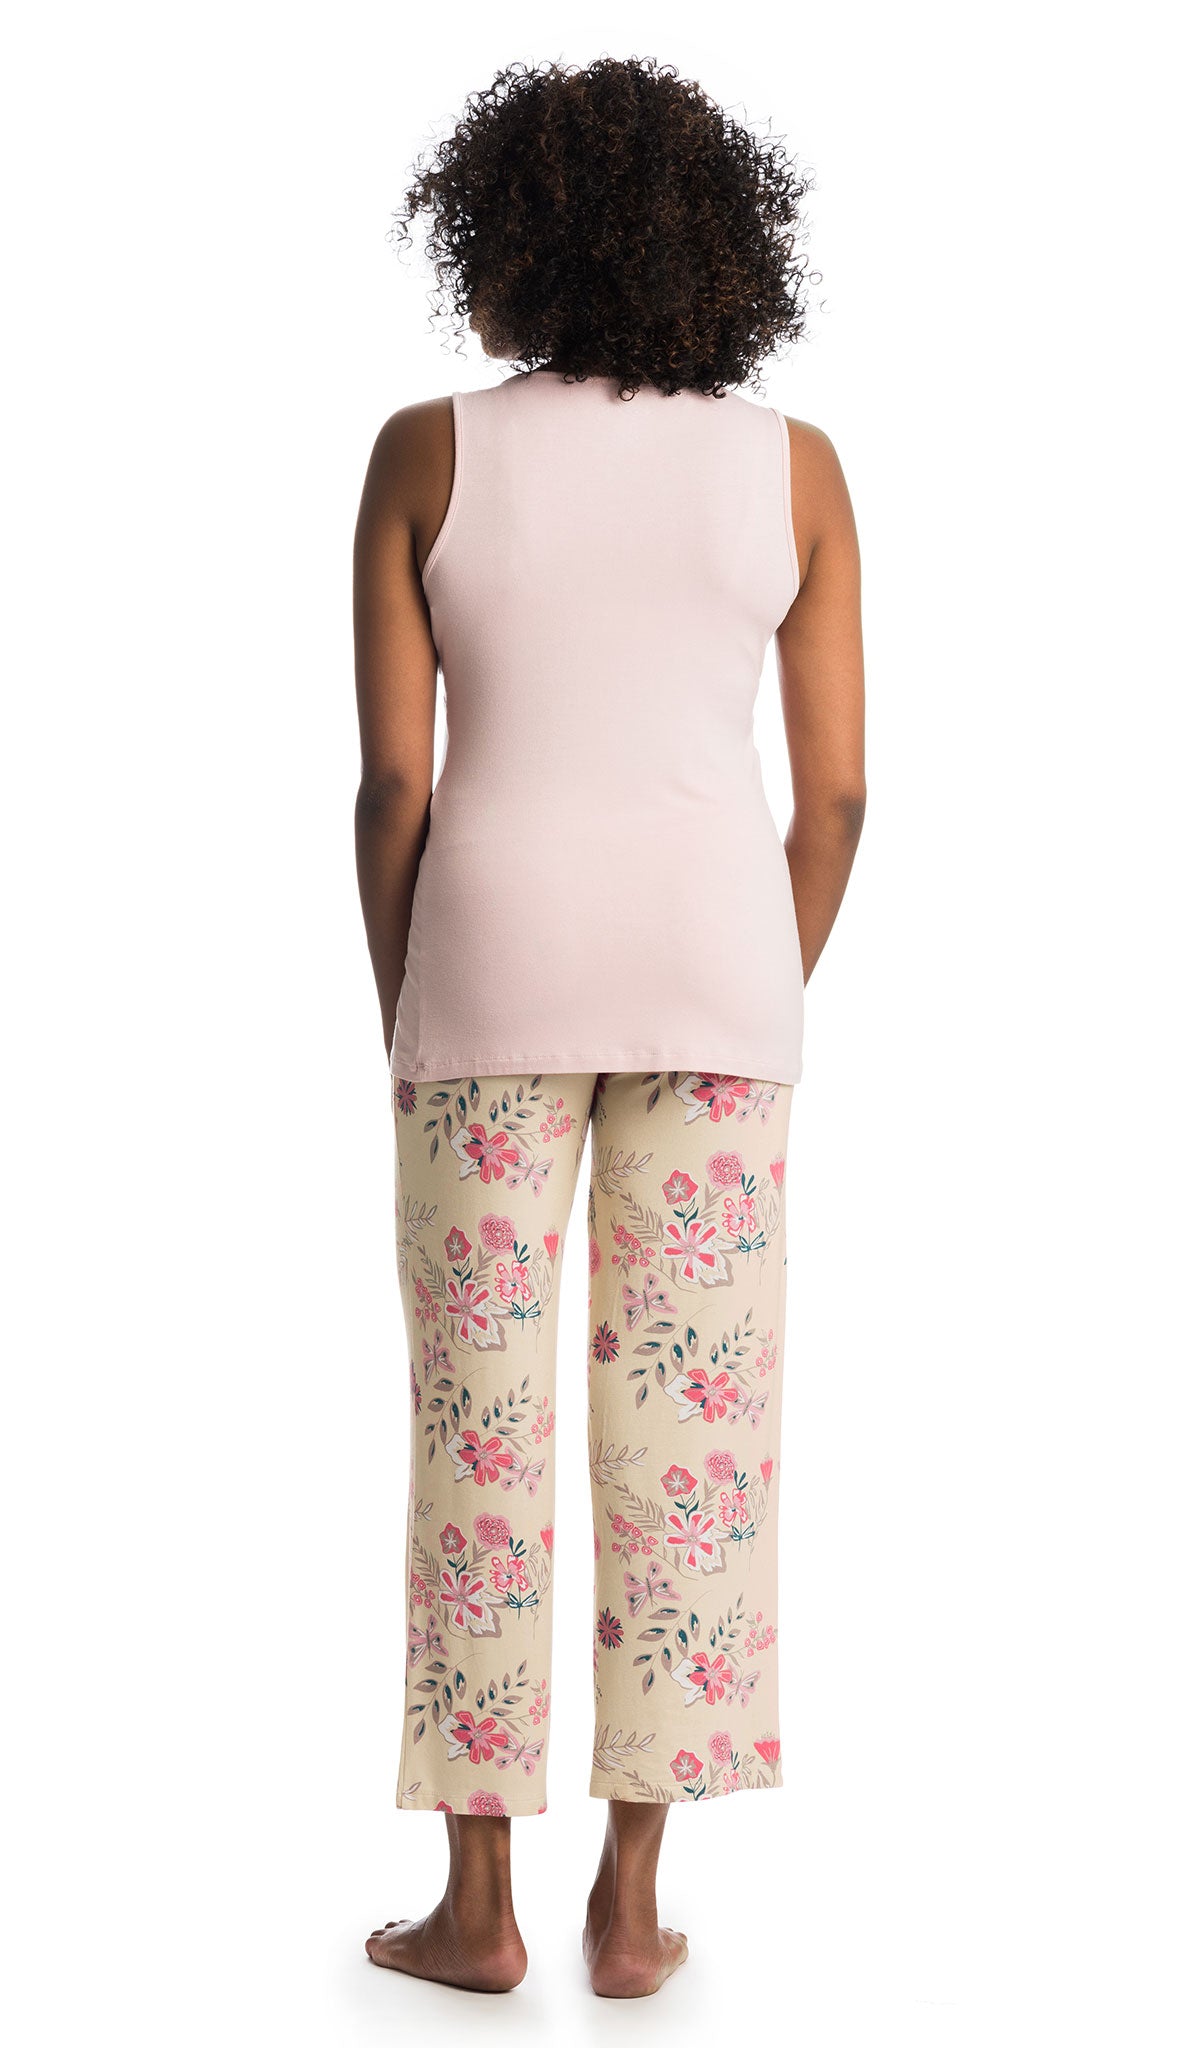 Wild Flower Analise 5-Piece Set, back shot of woman wearing tank top and pant.